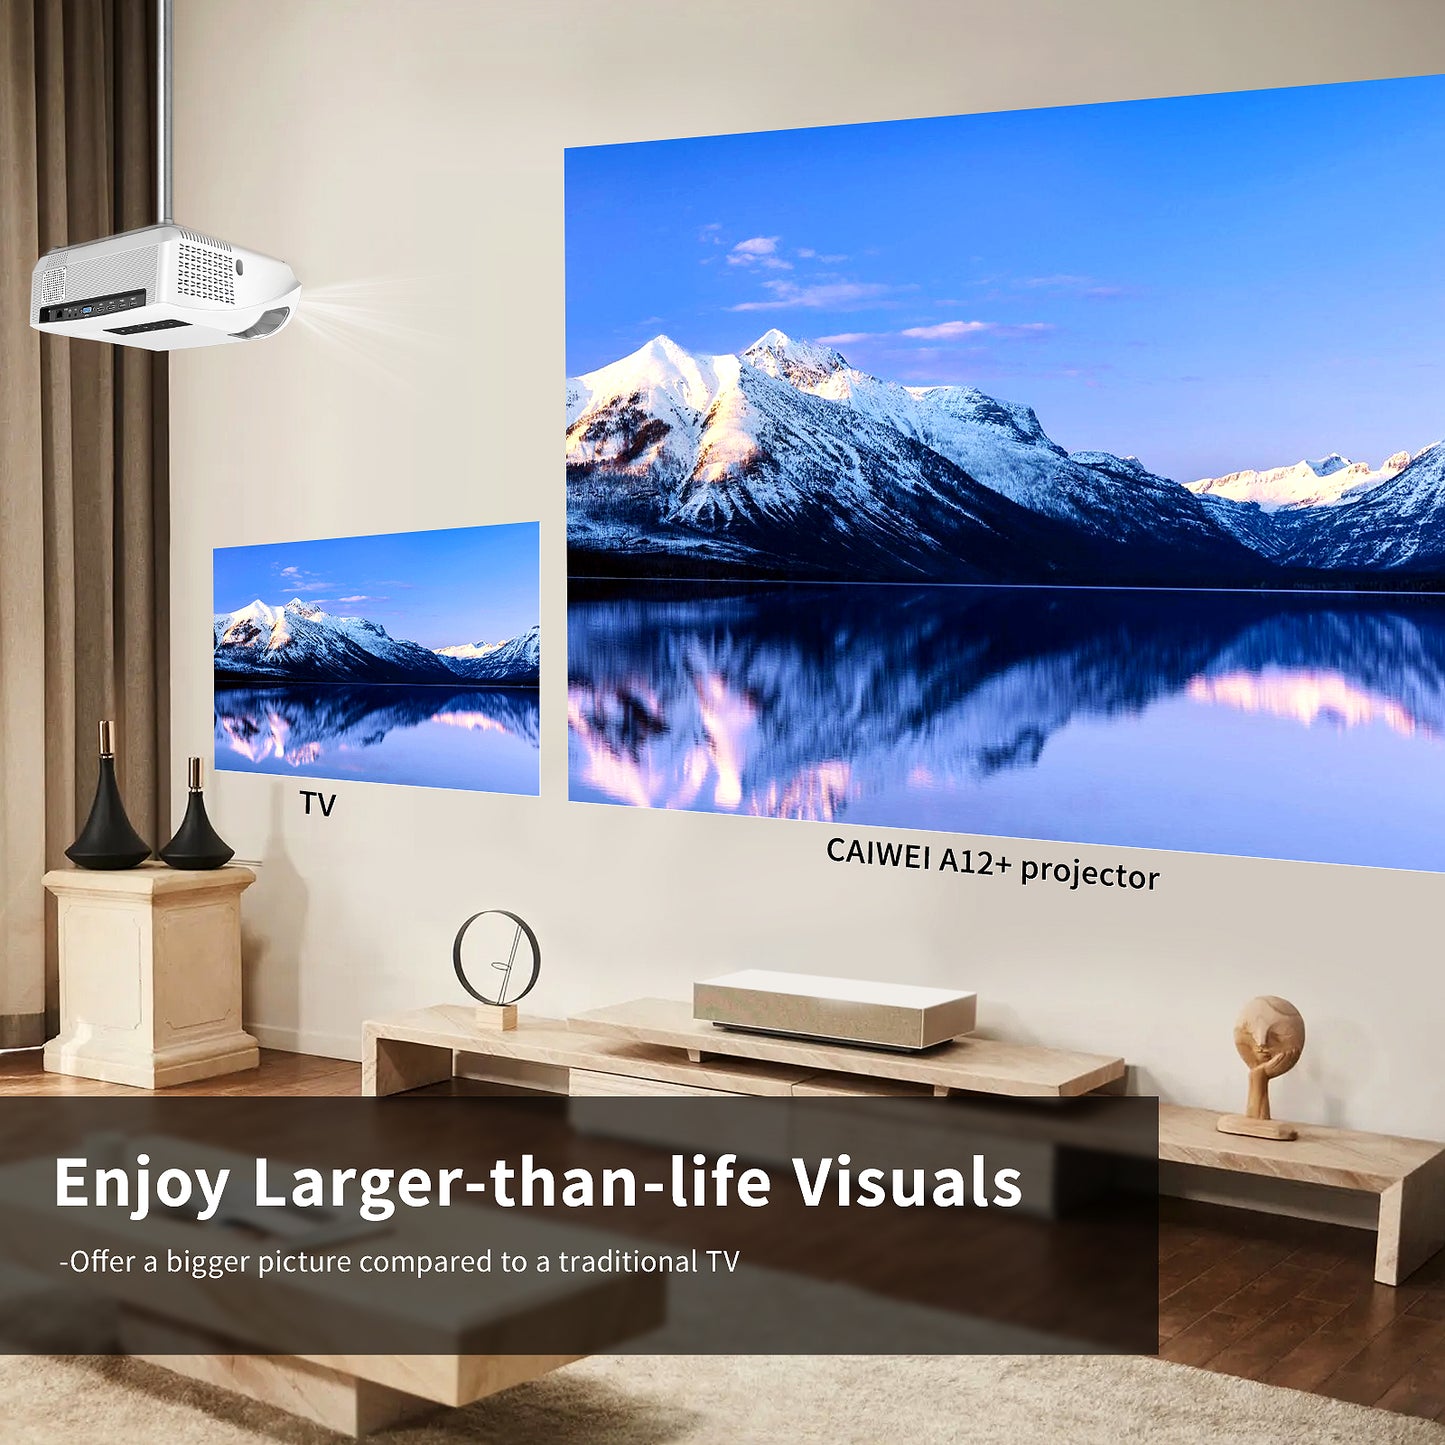 CAIWEI High Lumen 4K Projectors Daylight 1100 ANSI/14300LM, 5G WiFi Bluetooth Smart LCD Android TV Projector with Apps Netflix Prime Video Airplay, Zoom, HDMI ARC, USB, RJ45 for Home Theater Outdoor Office